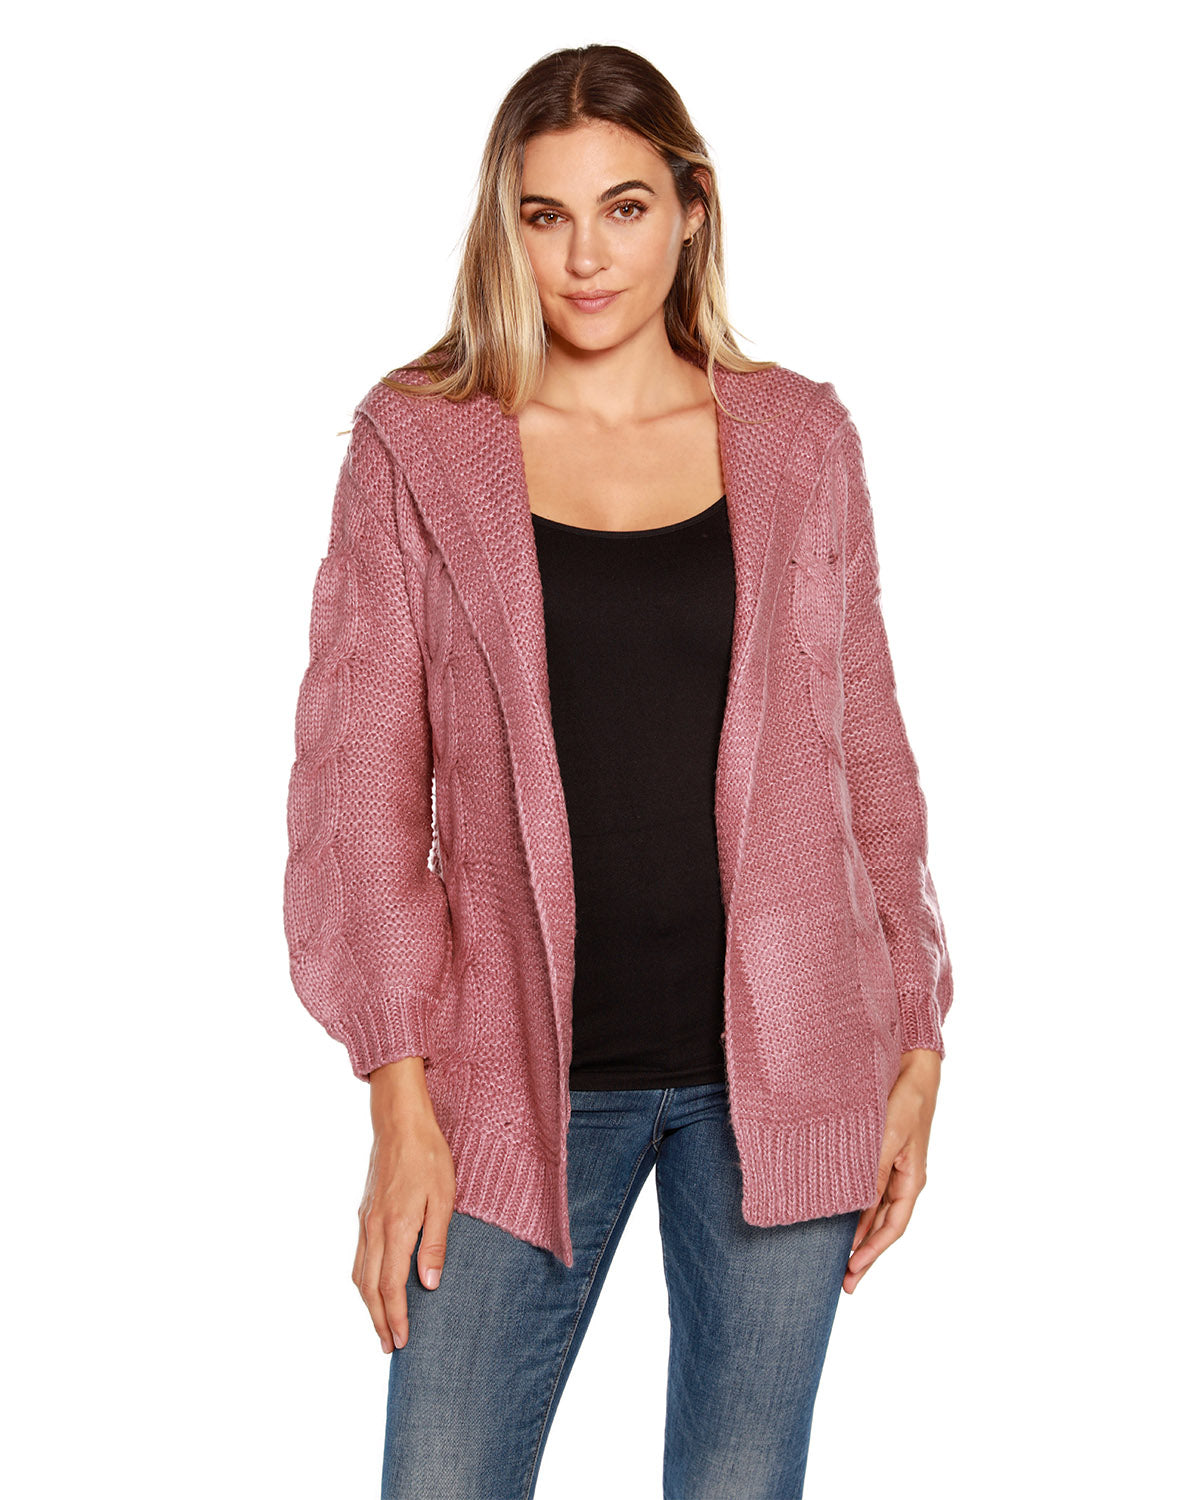 Women's Long Sleeve Knit Hoodie Cable Knit Cardigan with Pockets